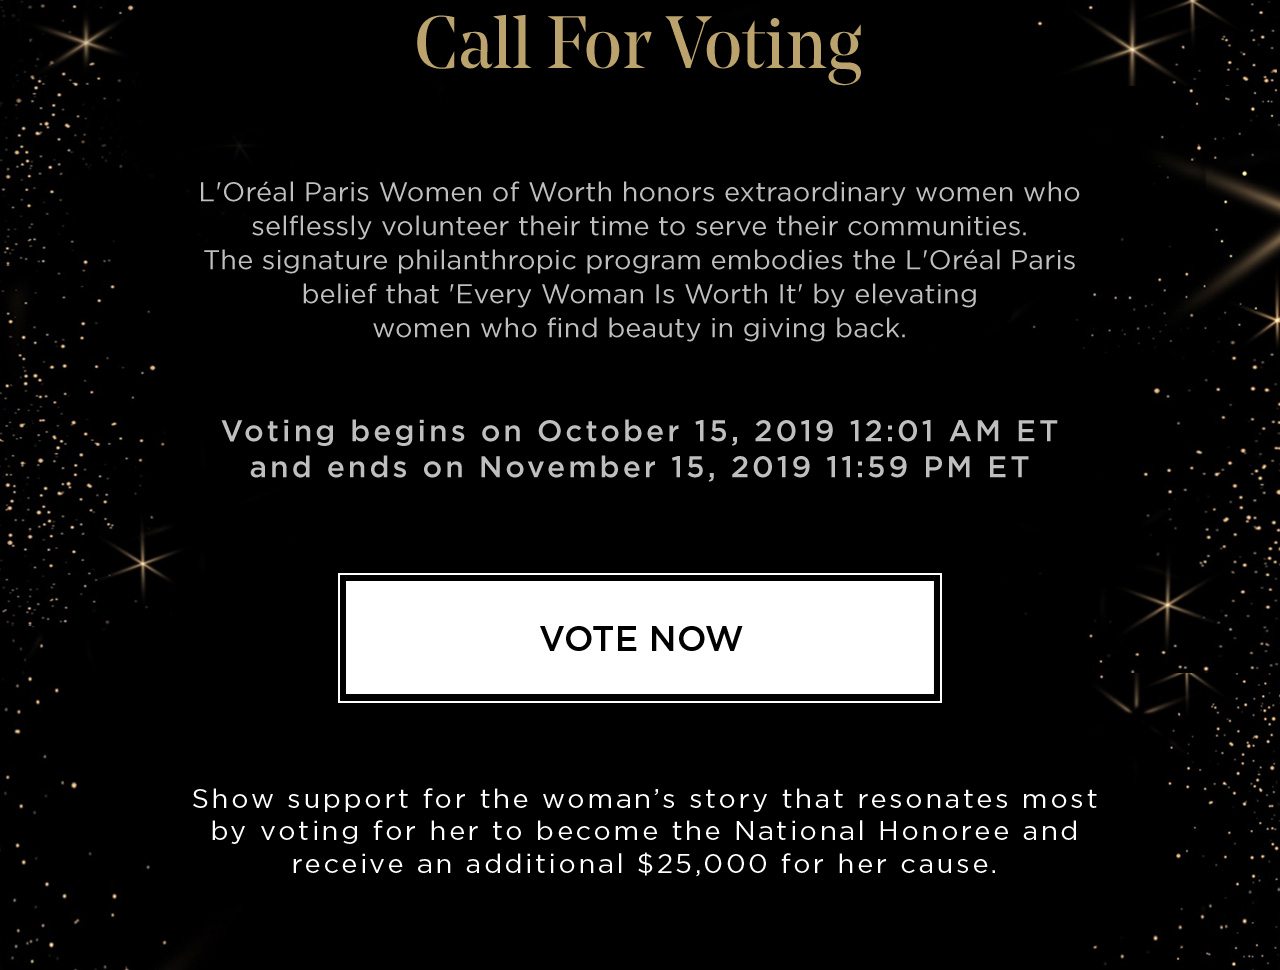 Call For Voting - L'Oréal Paris Women of Worth honors extraordinary women who selflessly volunteer their time to serve their communities. The signature philanthropic program embodies the L'Oréal Paris belief that 'Every Woman Is Worth It' by elevating women who find beauty in giving back. - Voting begins on October 15, 2019 12:01 AM ET and ends on November 15, 2019 11:59 PM ET - VOTE NOW - Show support for the woman’s story that resonates most by voting for her to become the National Honoree and receive an additional $25,000 for her cause.